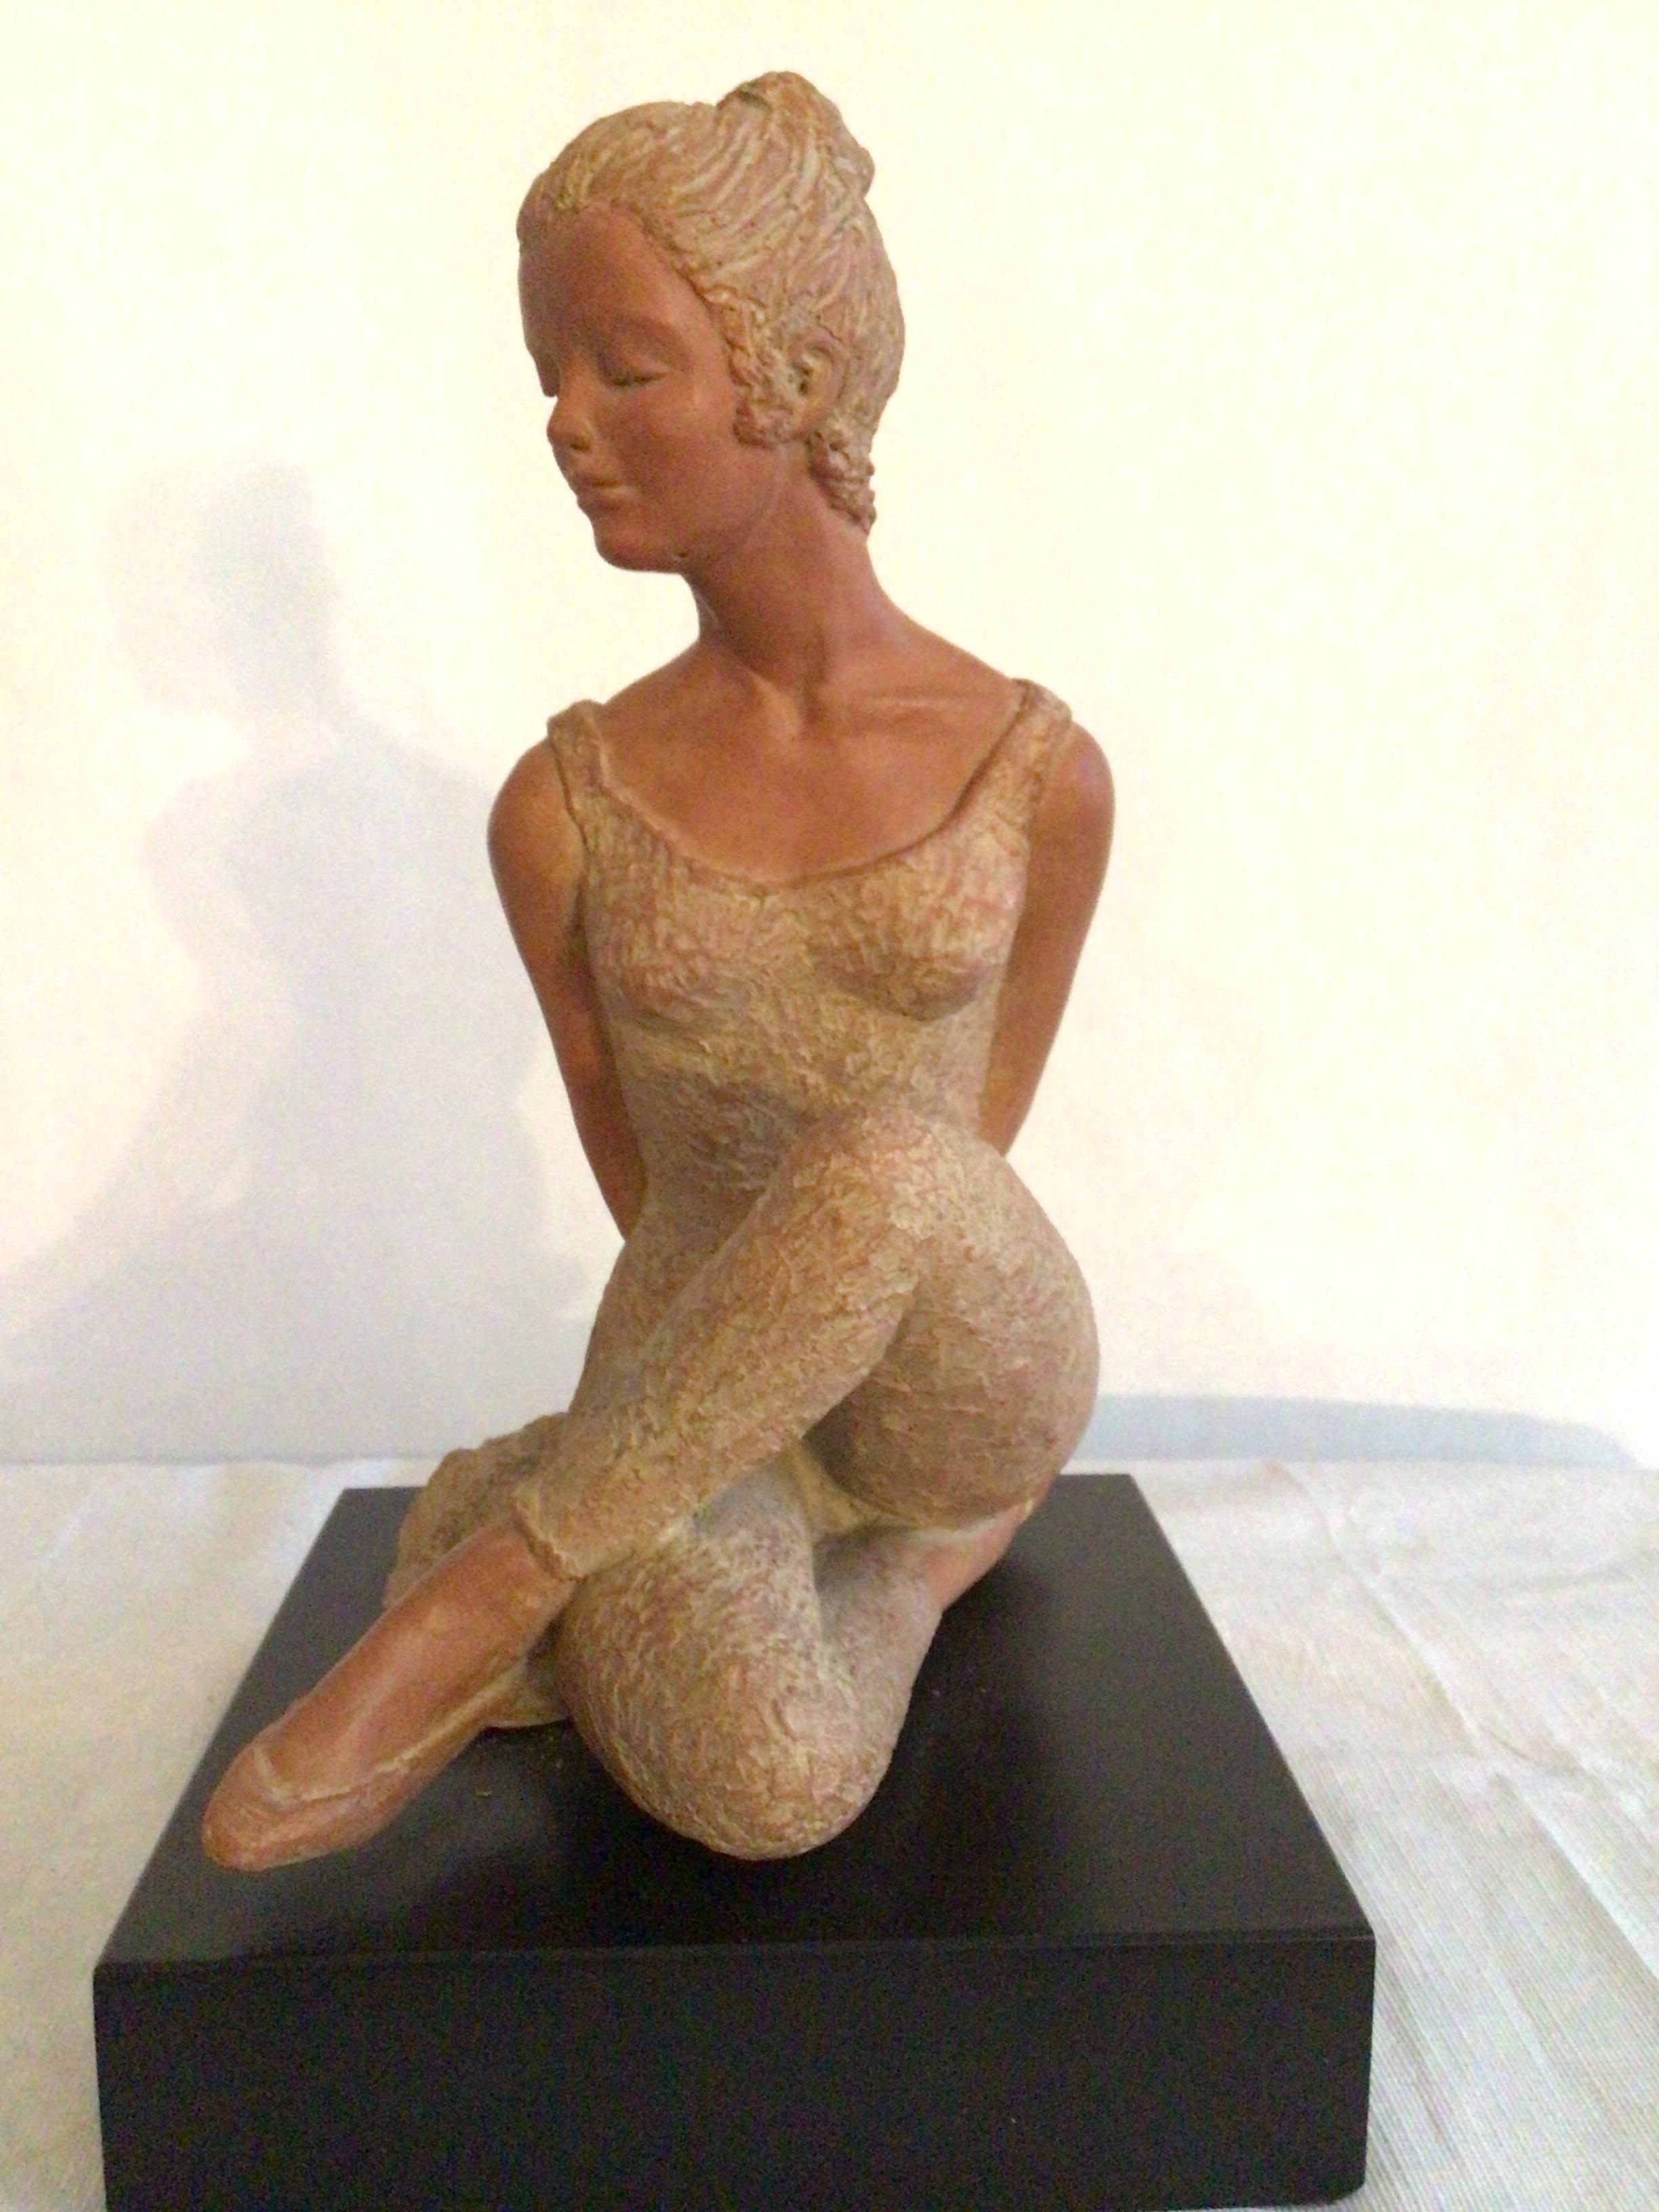 2001 Terracotta Sculpture On Wood Base Of A Ballerina Dancer Sitting Down With Her Legs Crossed
Yoga pose/ stretch
Stamped: AMR
On a black painted wood base
Texture in leotard and leggings
Small hole under chin where mounted (not shown)